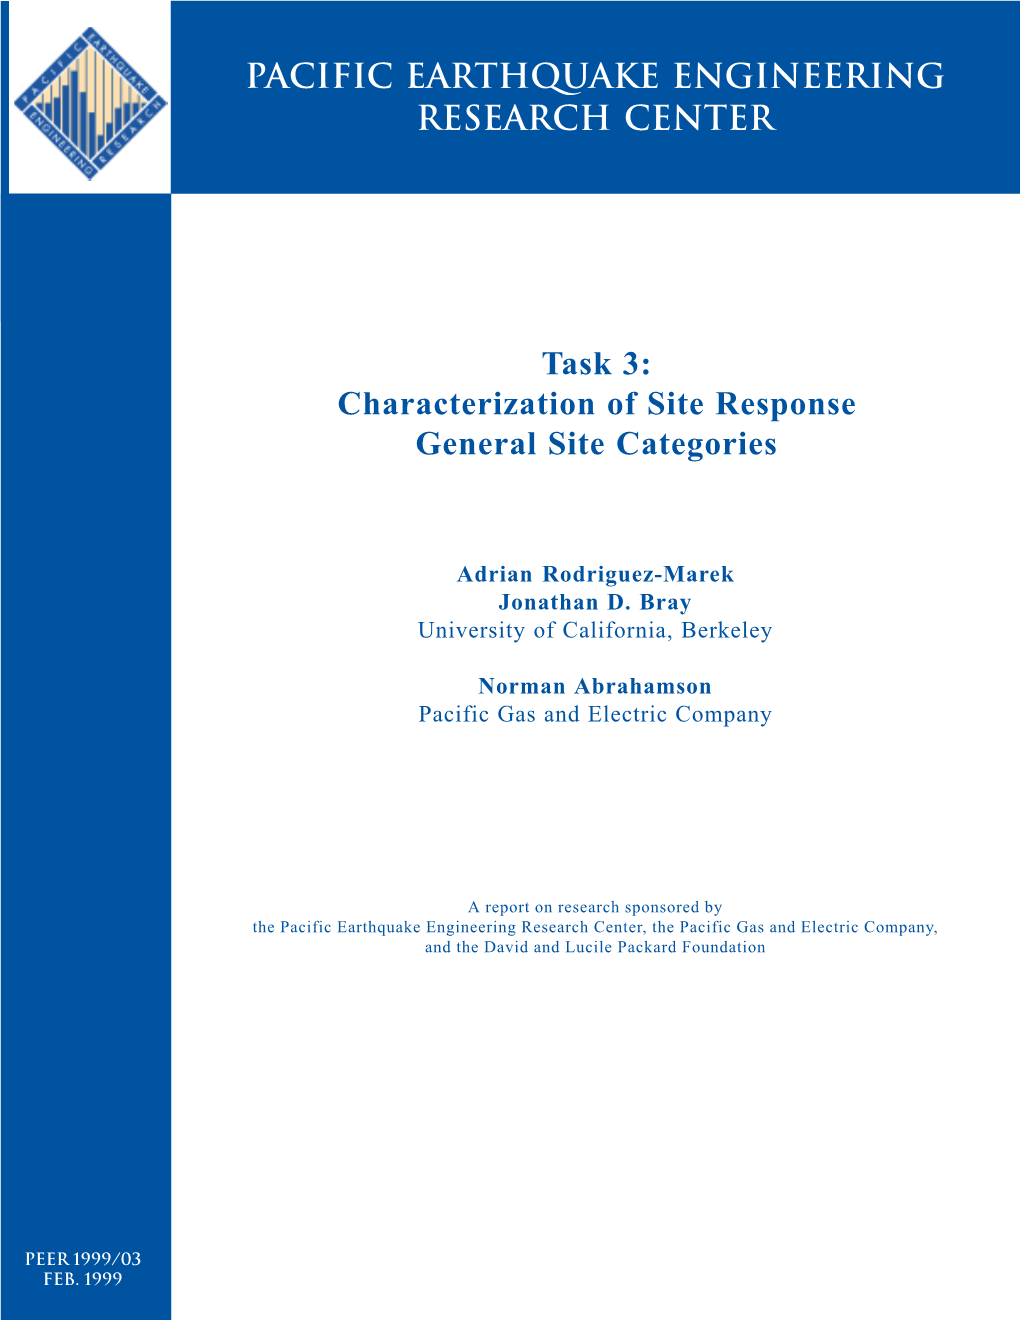 Characterization of Site Response General Site Categories